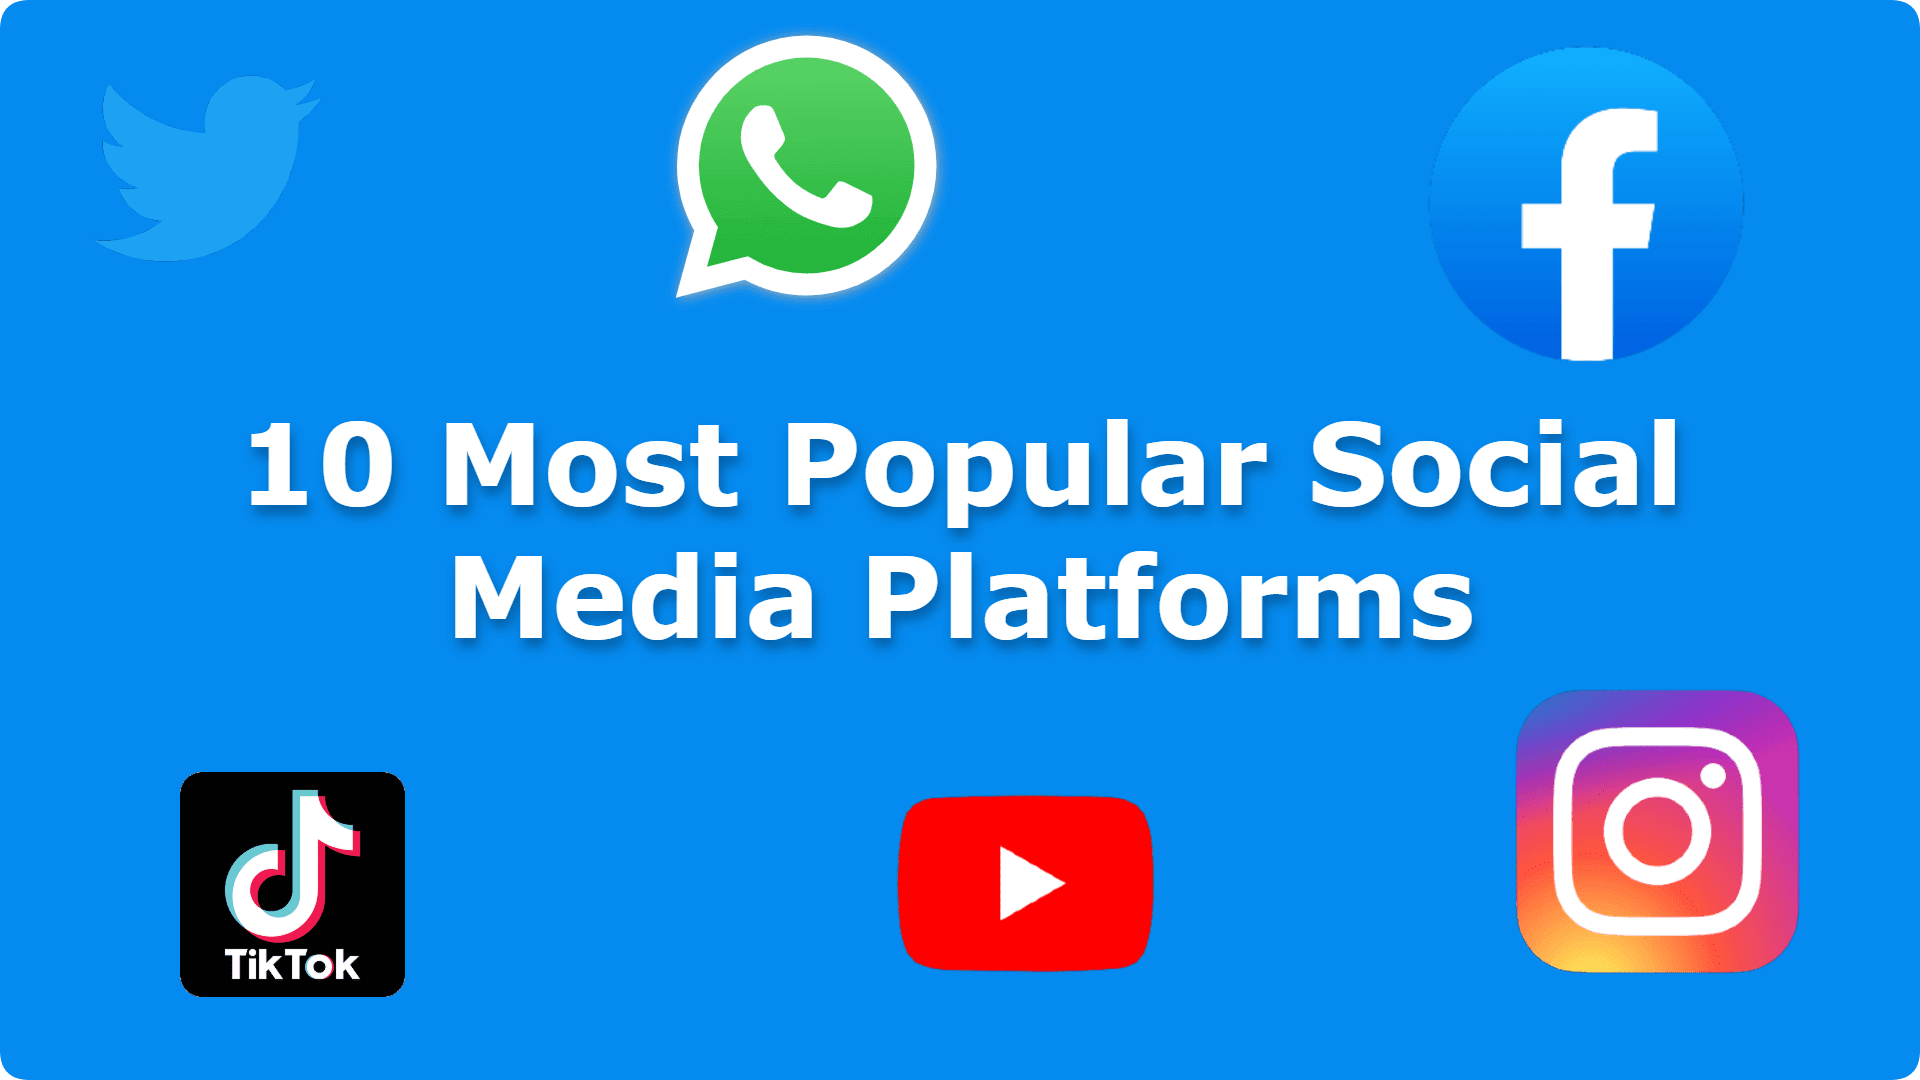 Top 15 Social Media Sites and Apps by Active Users